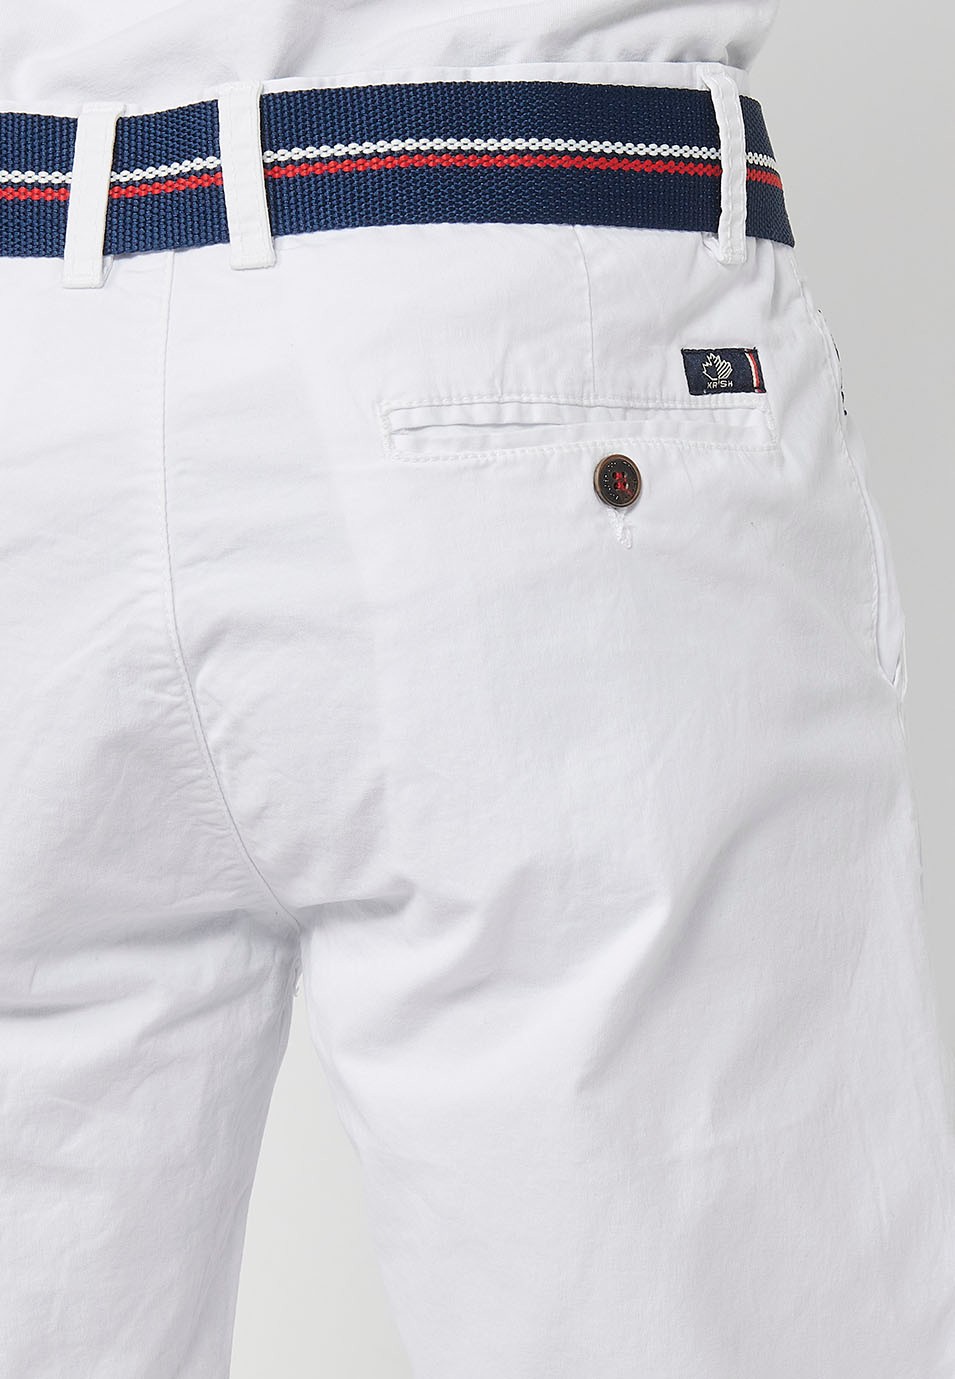 Shorts with a turn-up finish with front closure with zipper and button and belt in White for Men 9